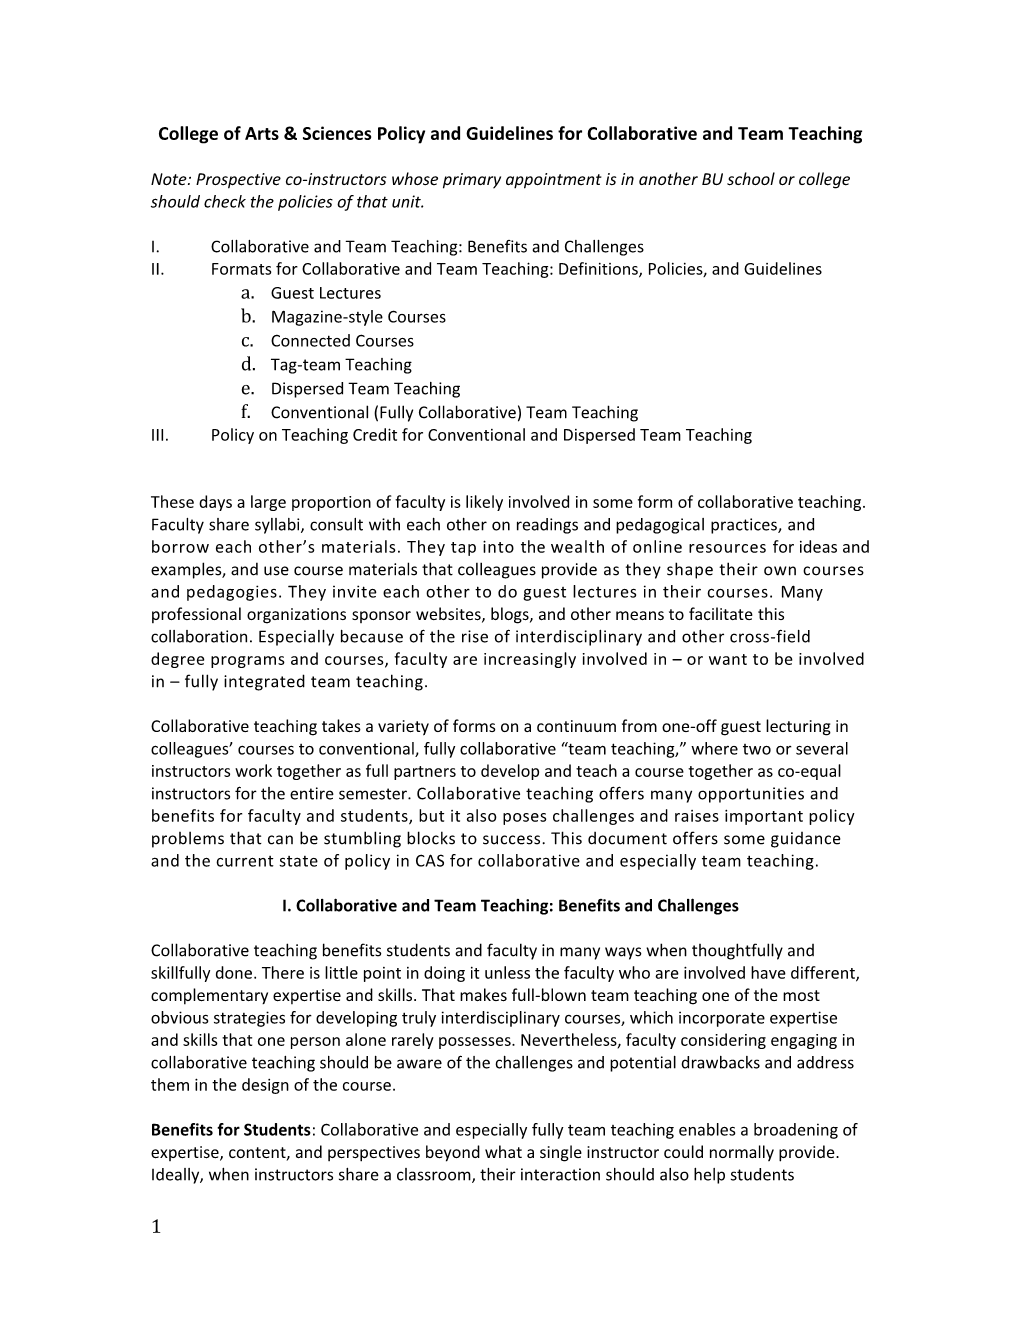 College of Arts & Sciences Policy and Guidelines for Collaborative and Team Teaching